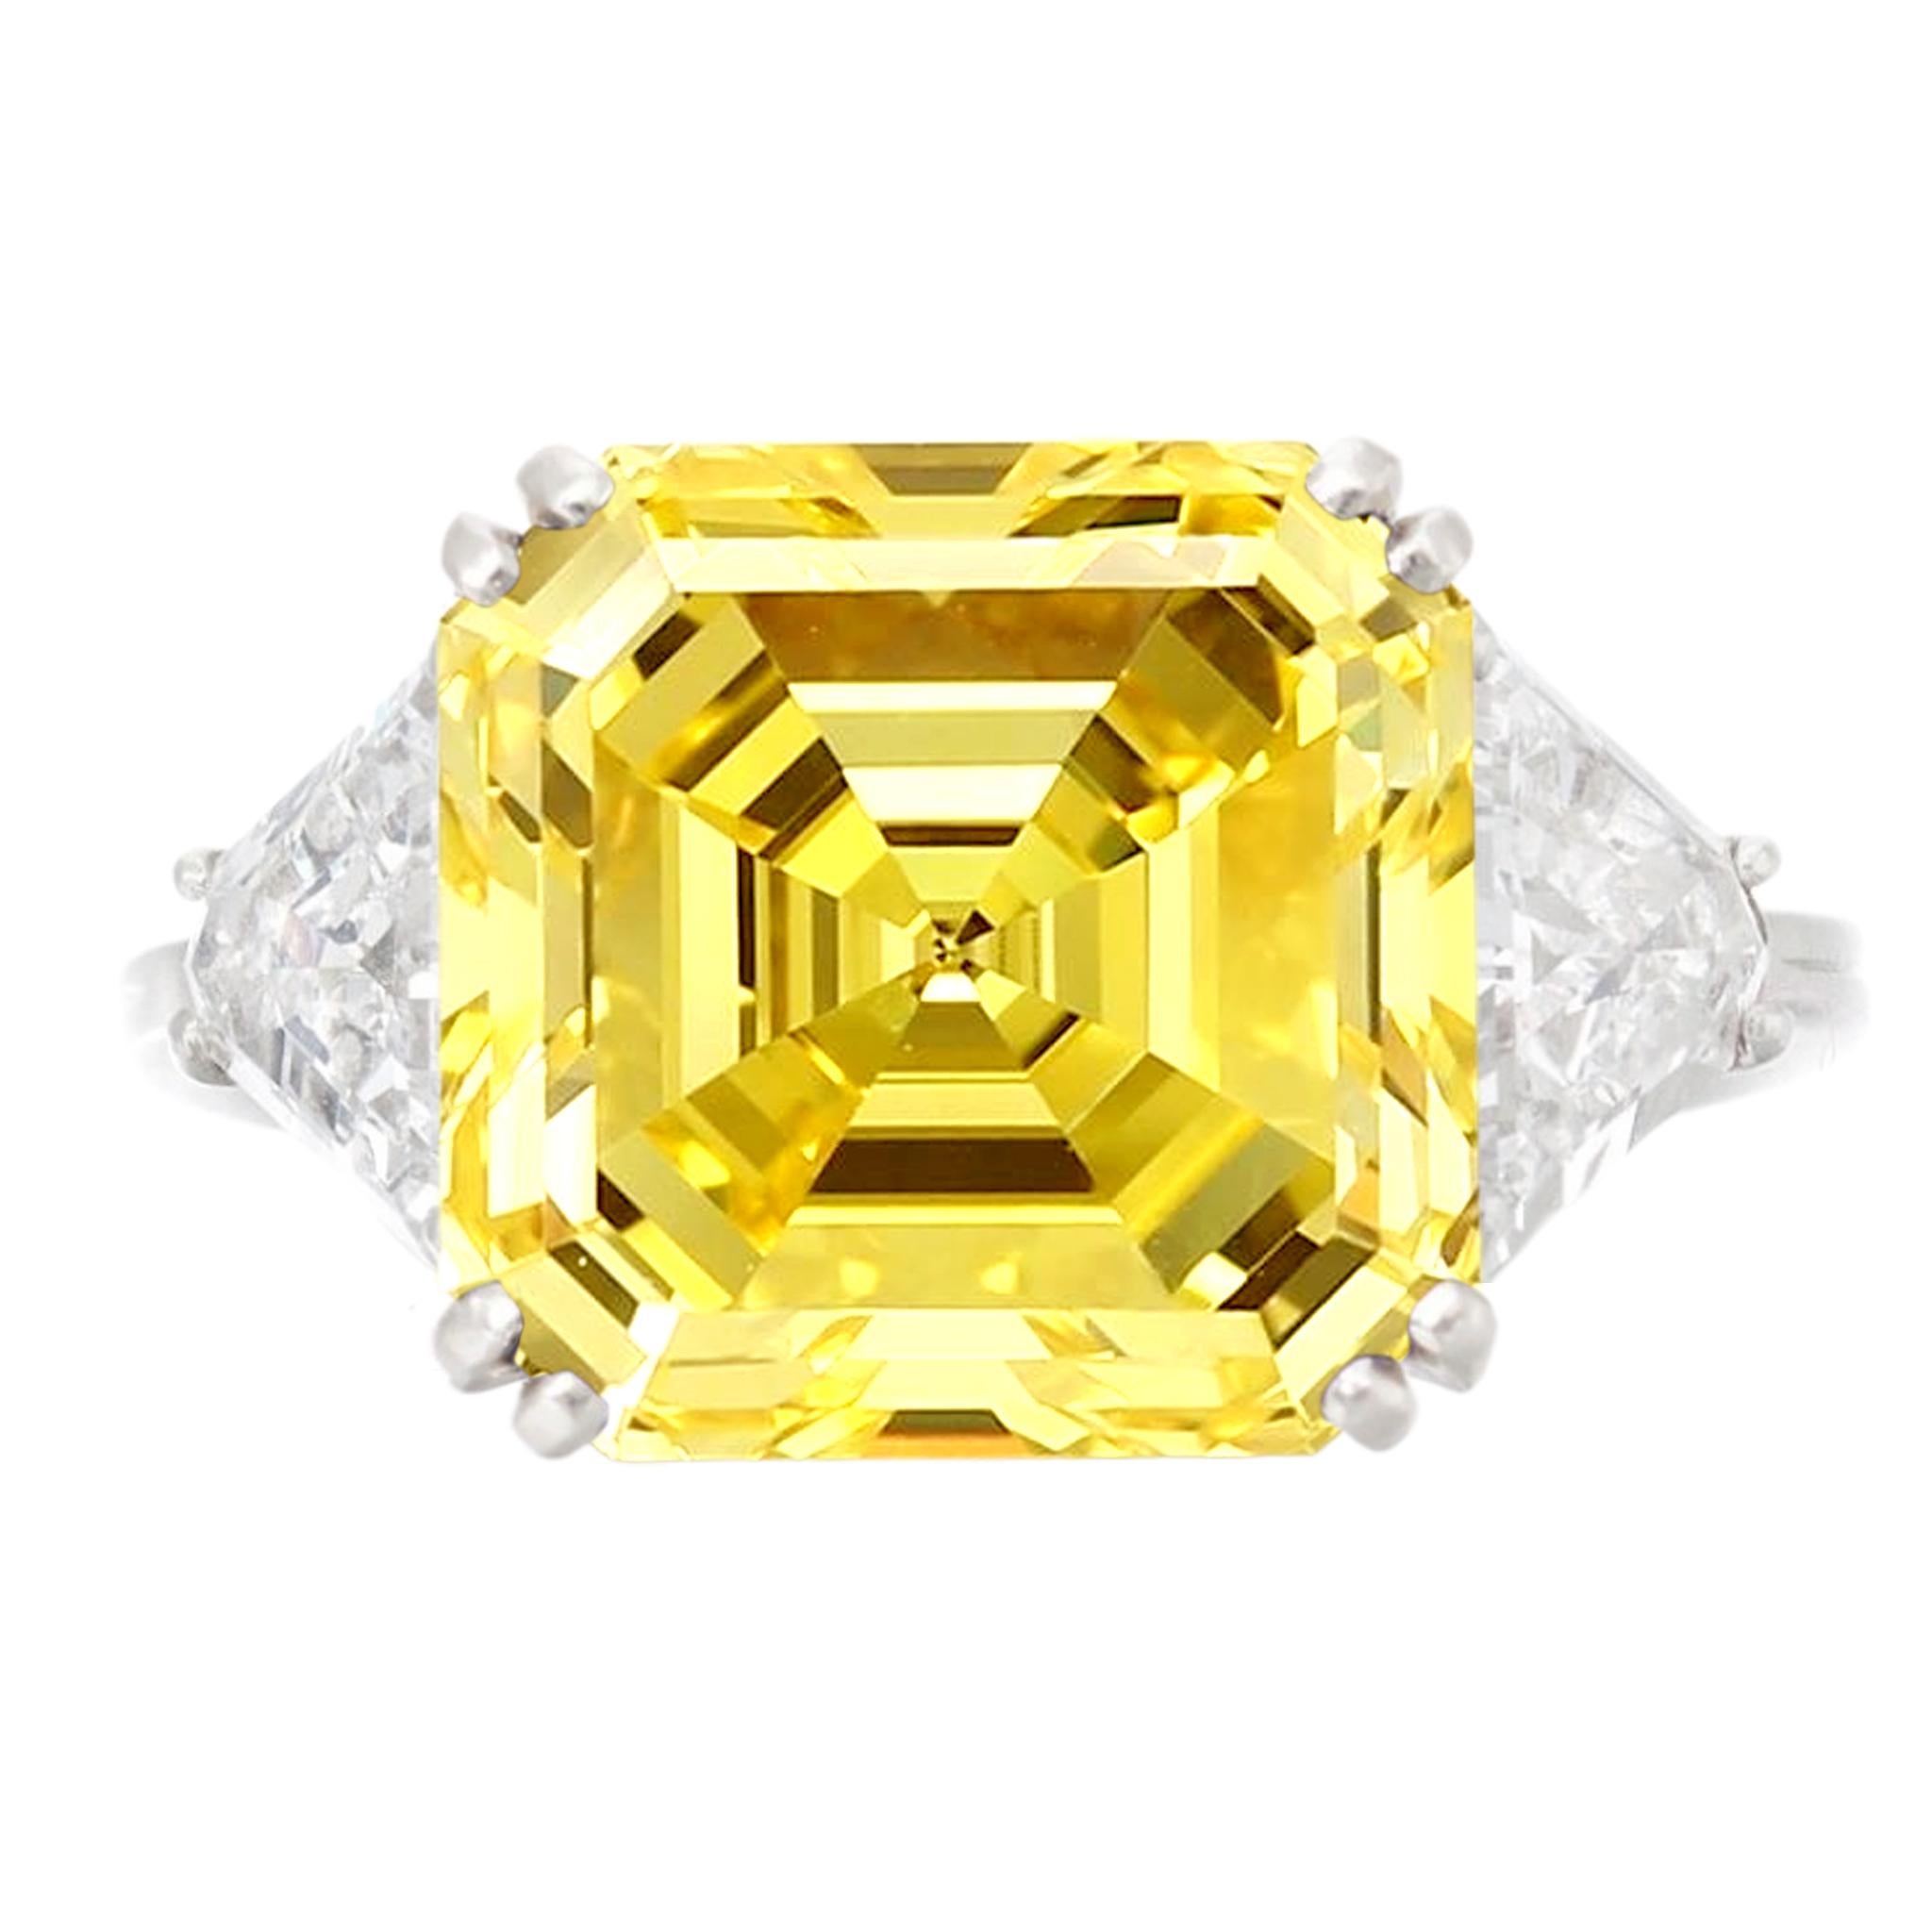 Crafted by the esteemed house of Antinori Di Sanpietro, this engagement ring is a marvel of luxury and distinction. It showcases a resplendent 5-carat Asscher cut diamond, GIA certified and imbued with a captivating fancy yellow hue that symbolizes